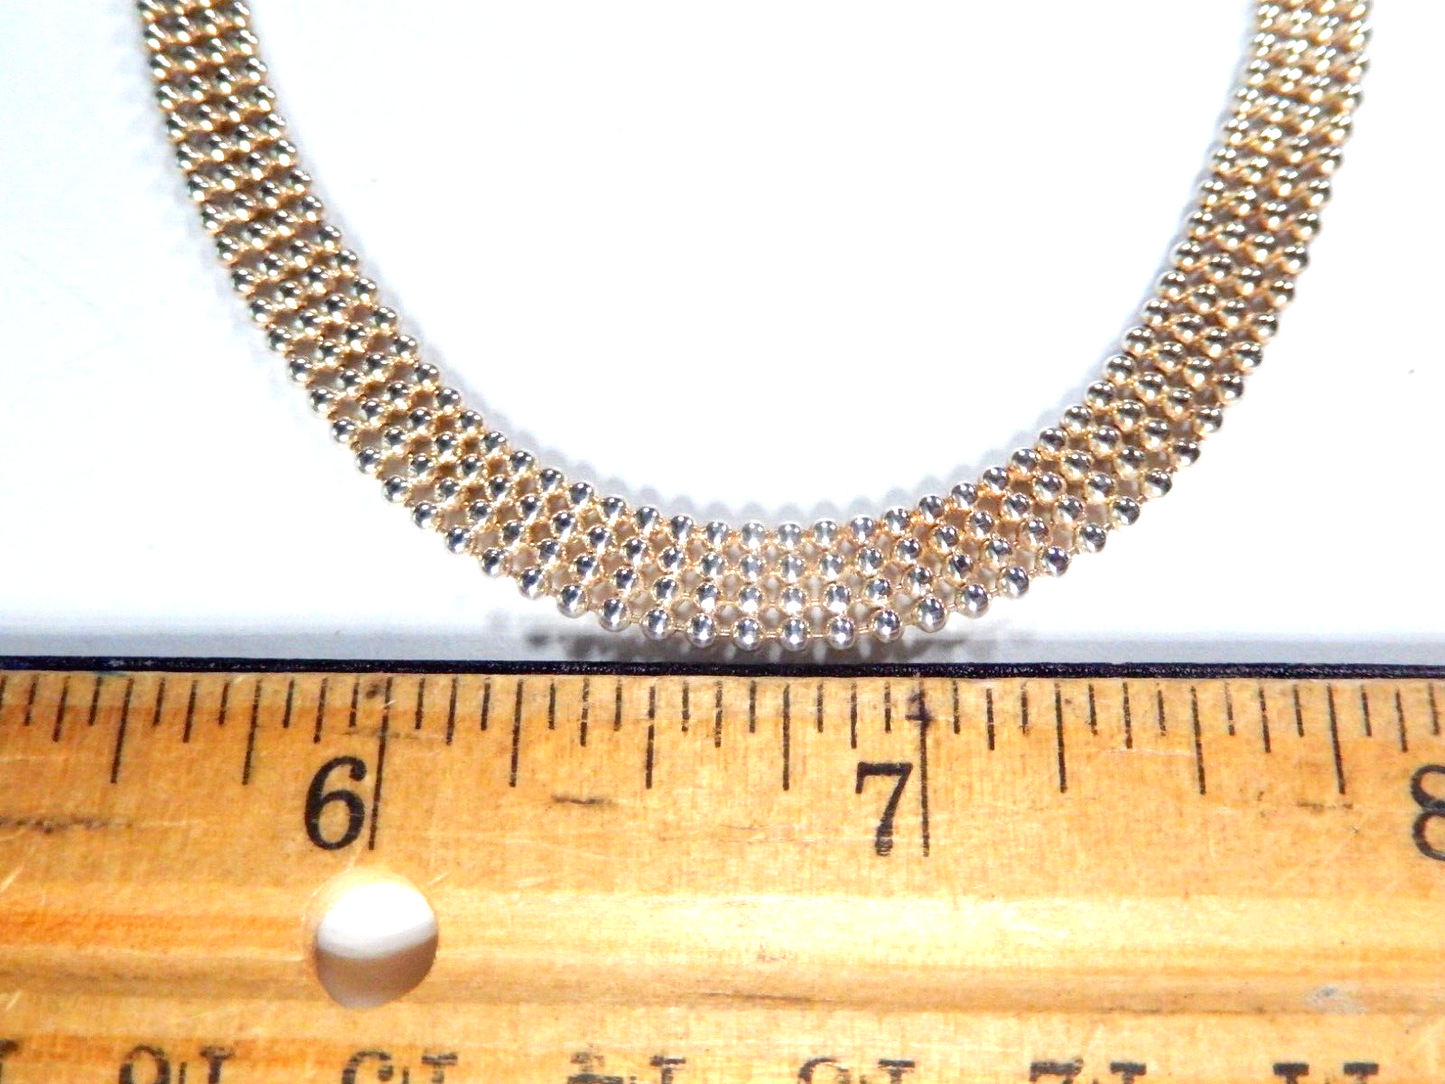 *VINTAGE*  Sterling Silver 7mm Four Row Ball Bead Chain 16" Necklace - 17 grams